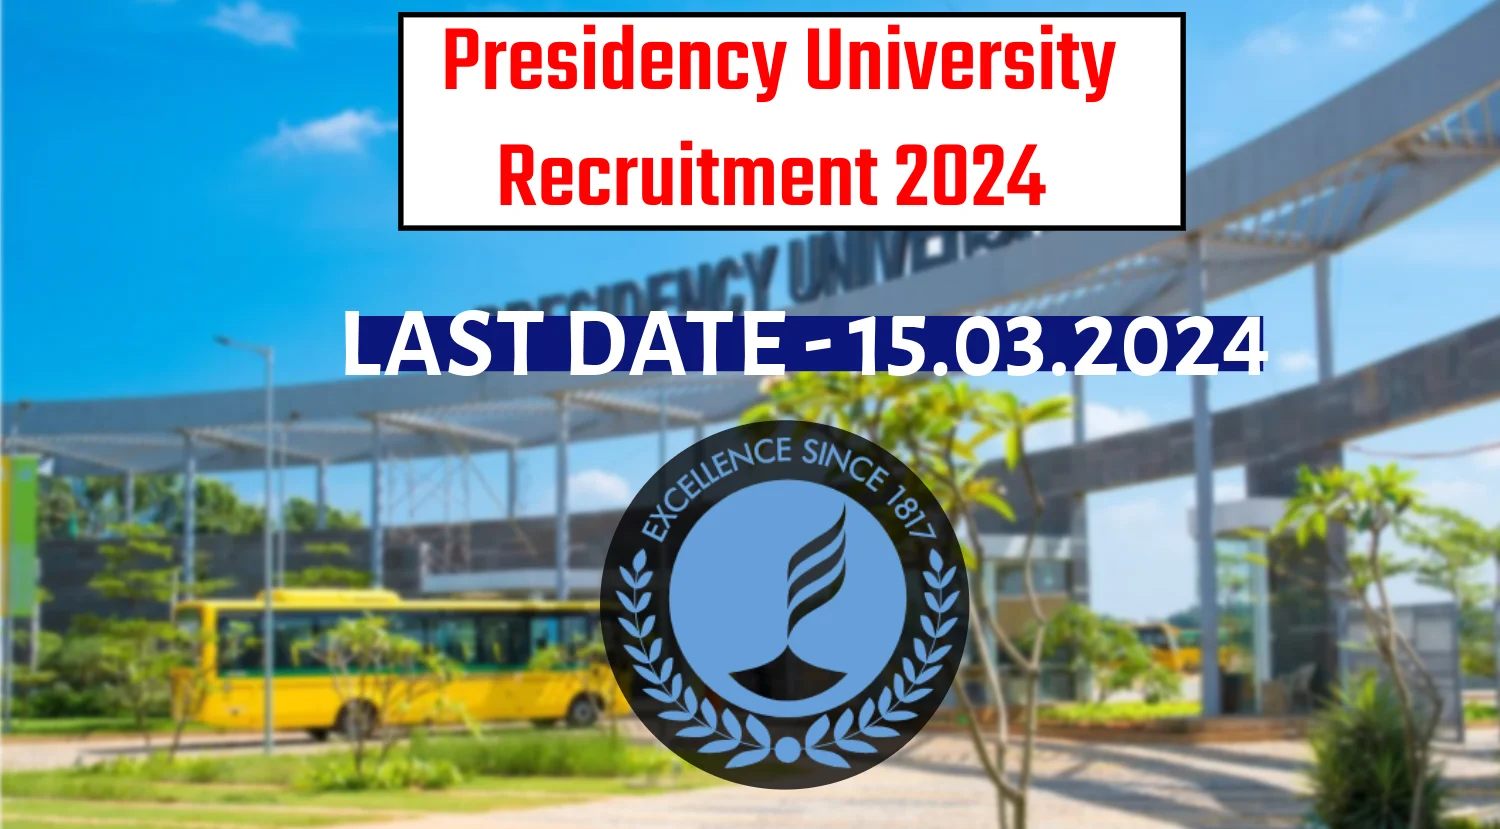 Applications are invited for Junior Research Fellow under DST-SERB project  at Presidency University | PharmaTutor